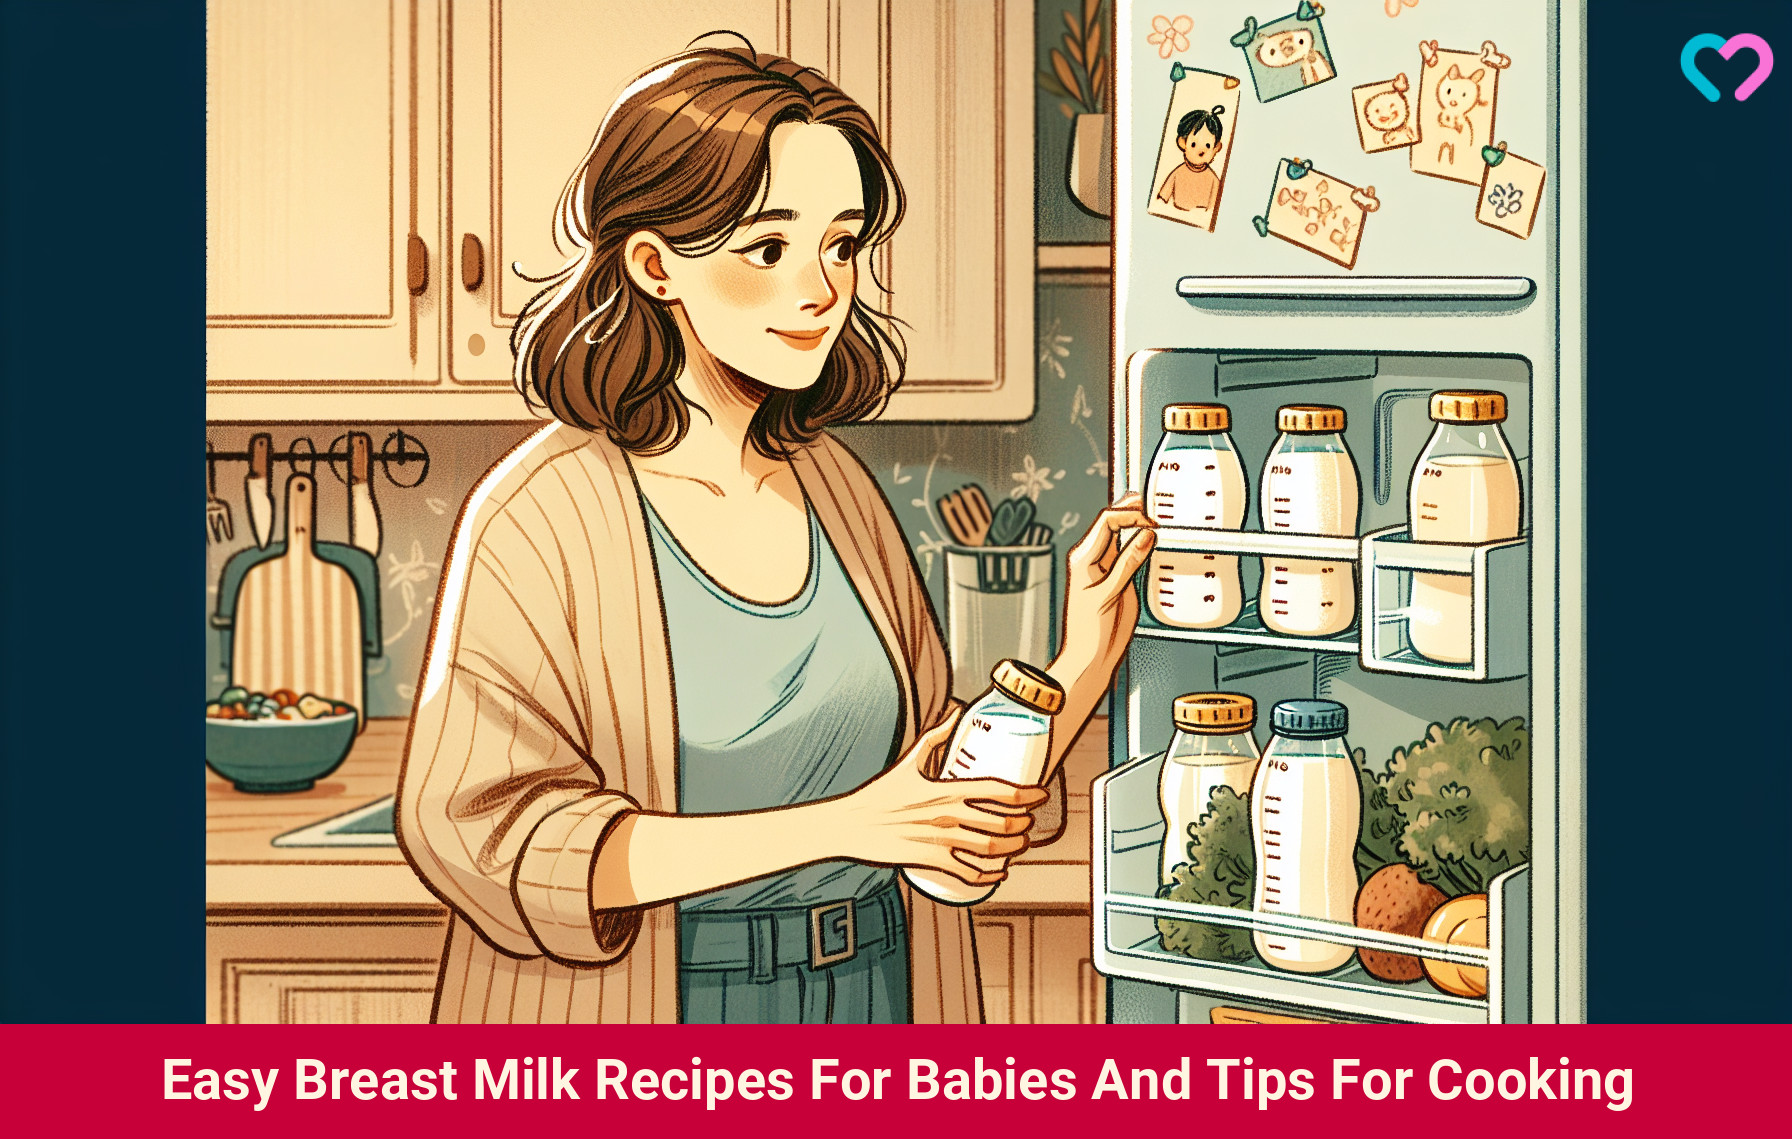 nutritious recipes with breask milk_illustration